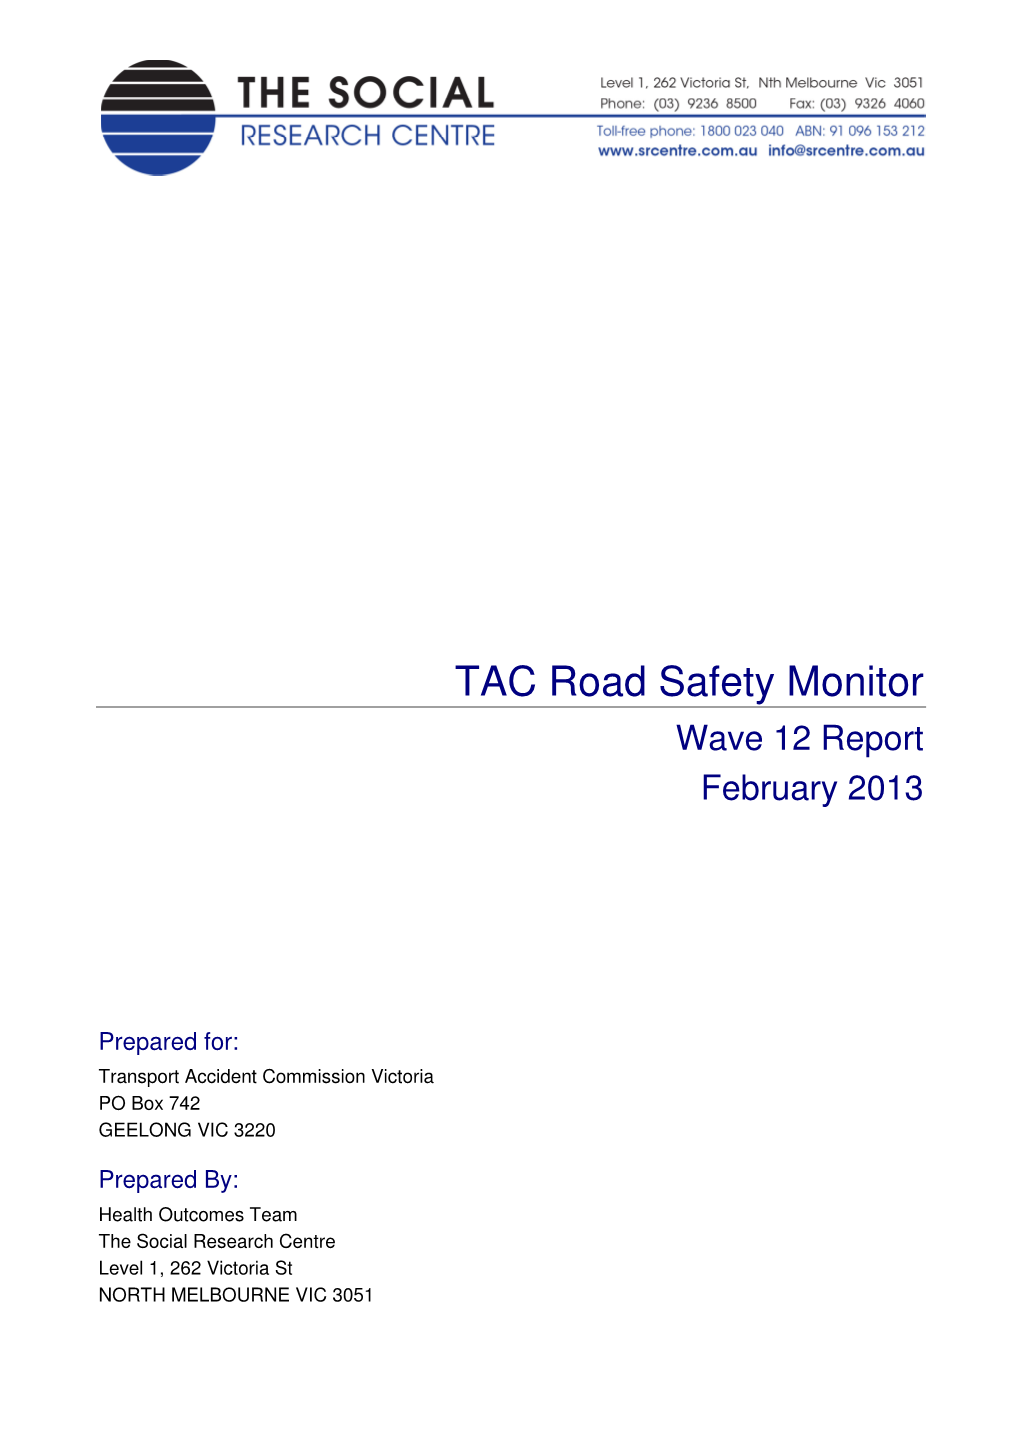 TAC Road Safety Monitor Wave 12 Report February 2013